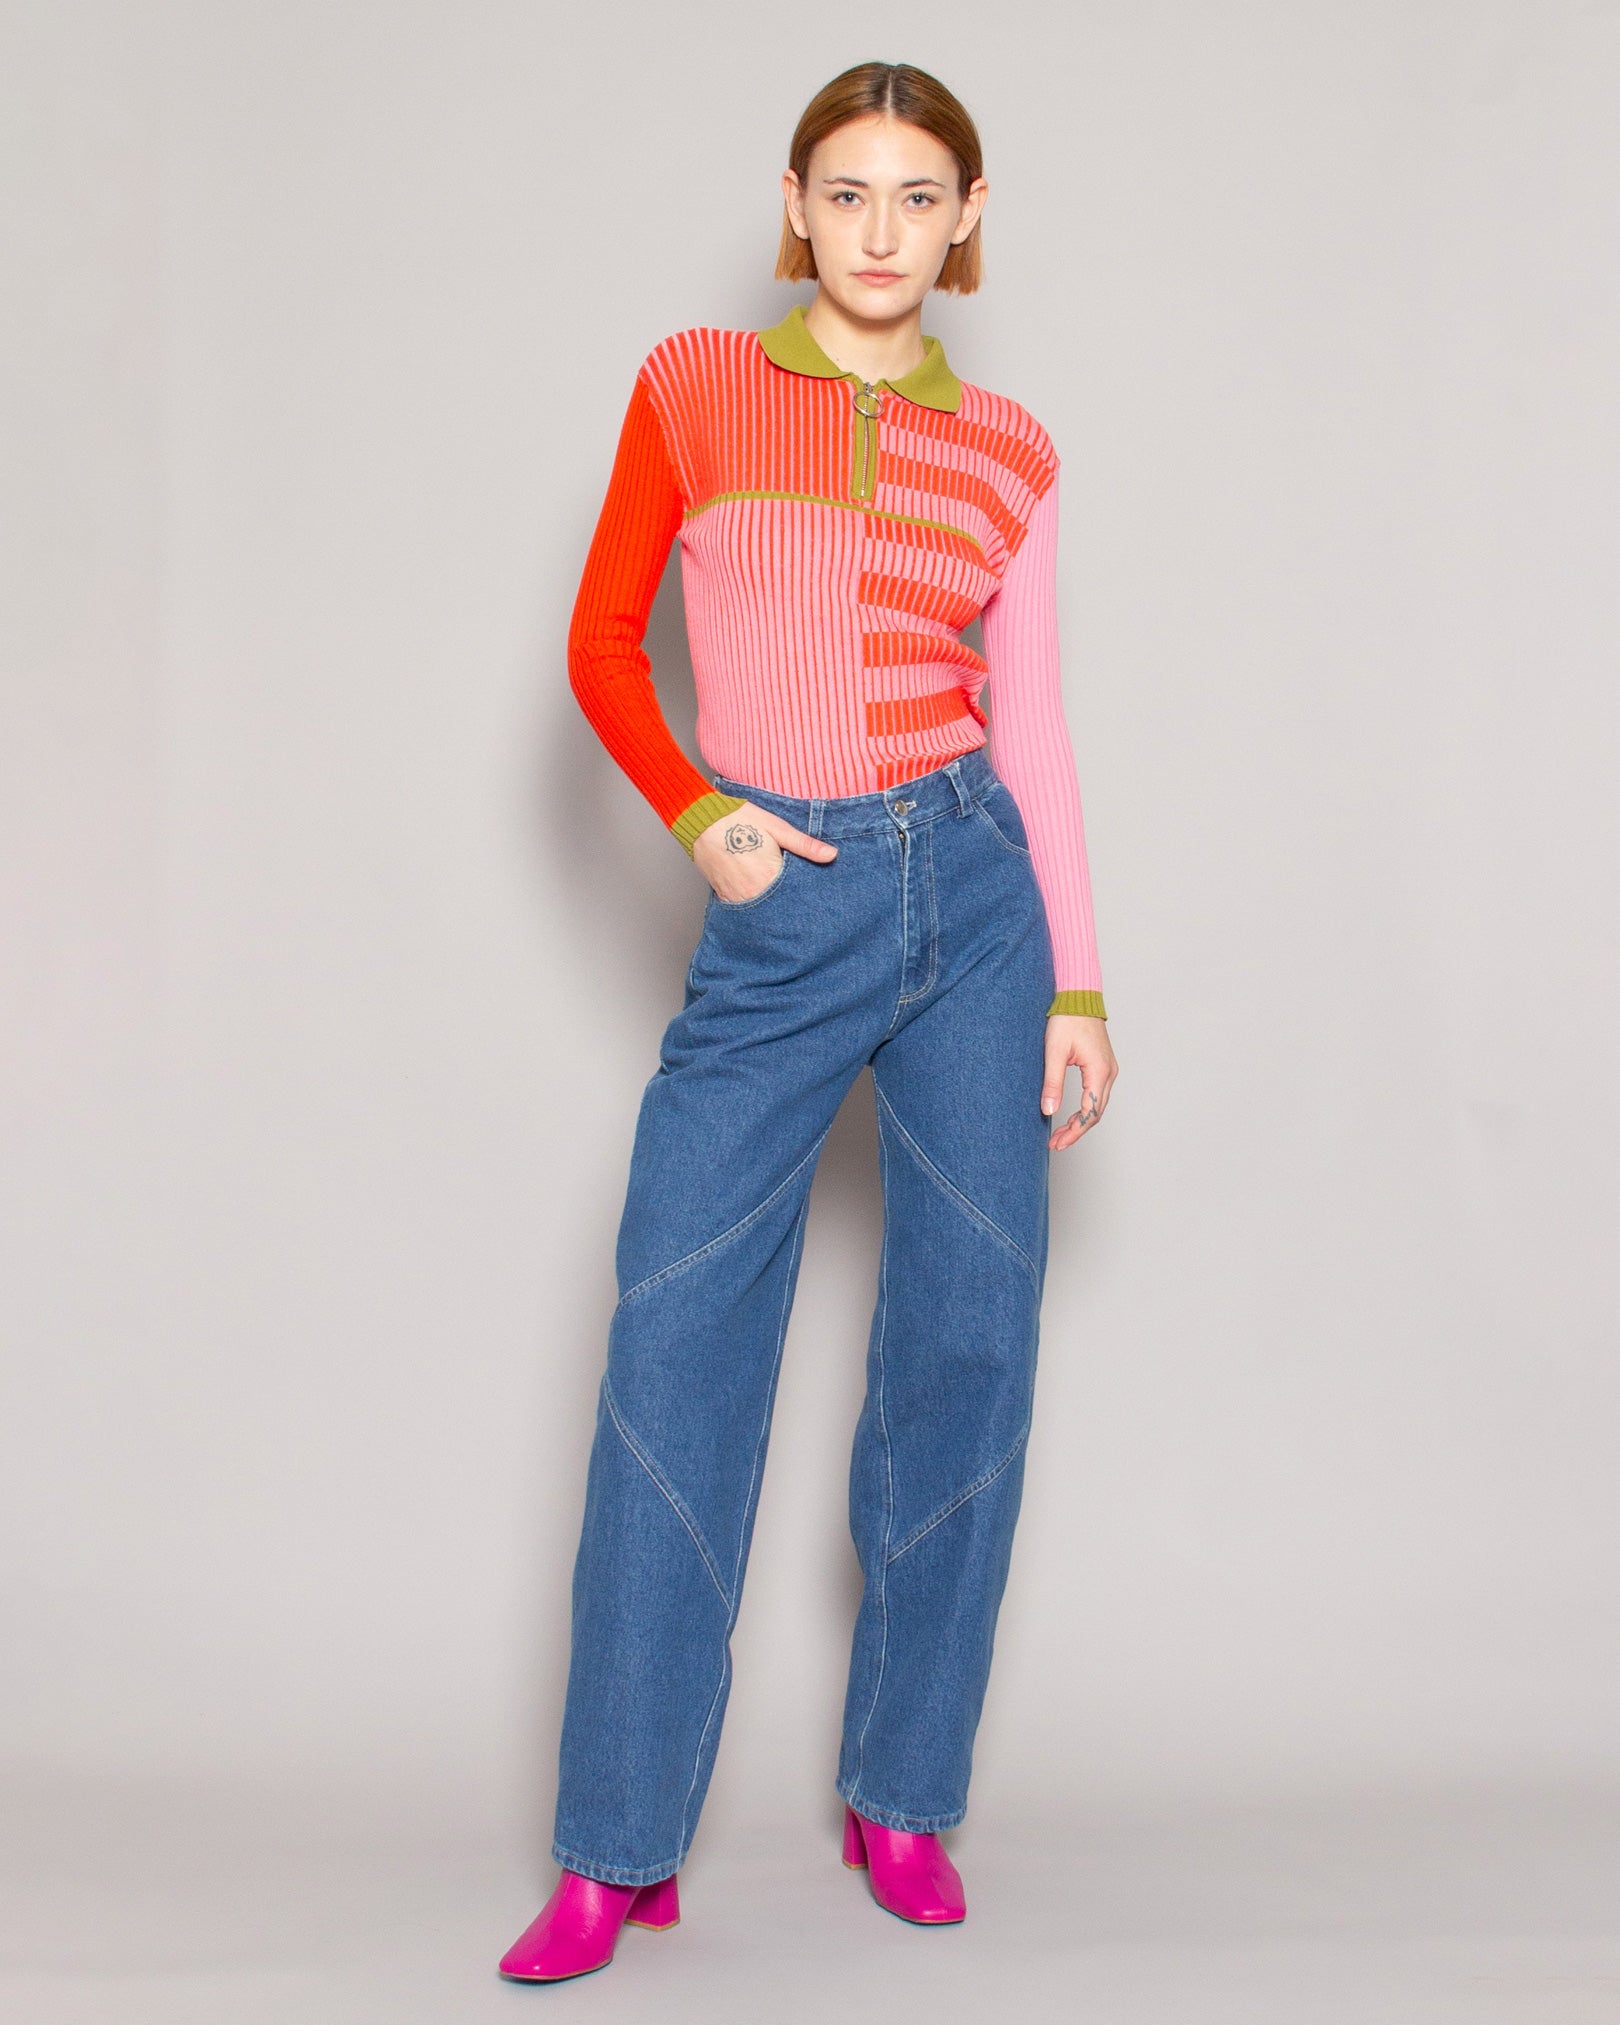 BEATRICE.B Half Zip Ribbed Knit Top in Pink Multi-Stripe available at Lahn.shop